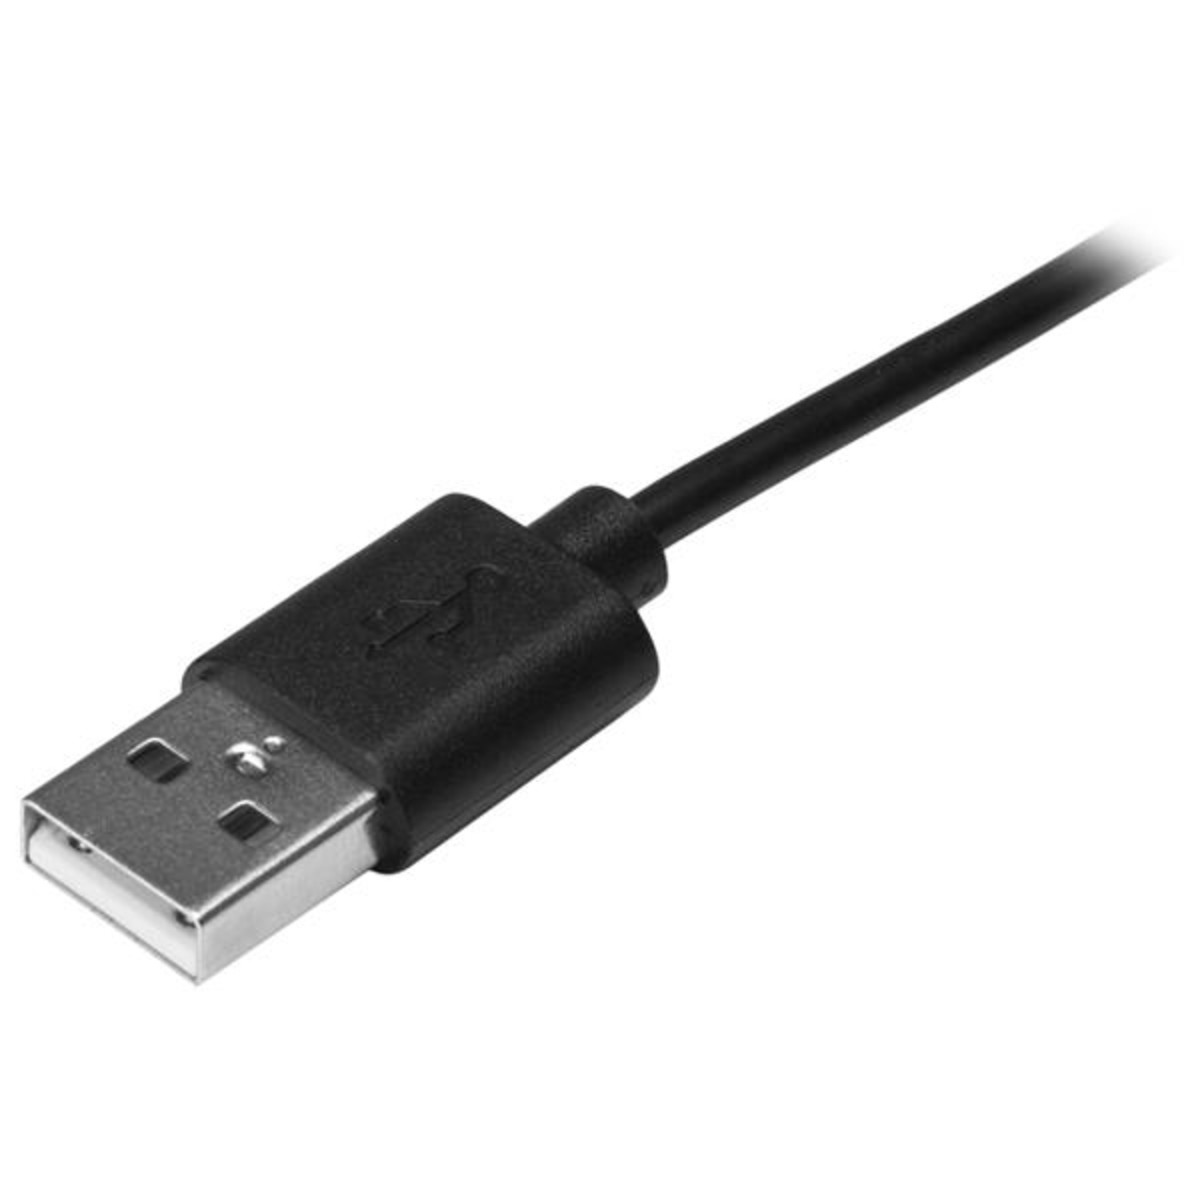 Cable - USB to USB C Cord - 10 Pack - 2m